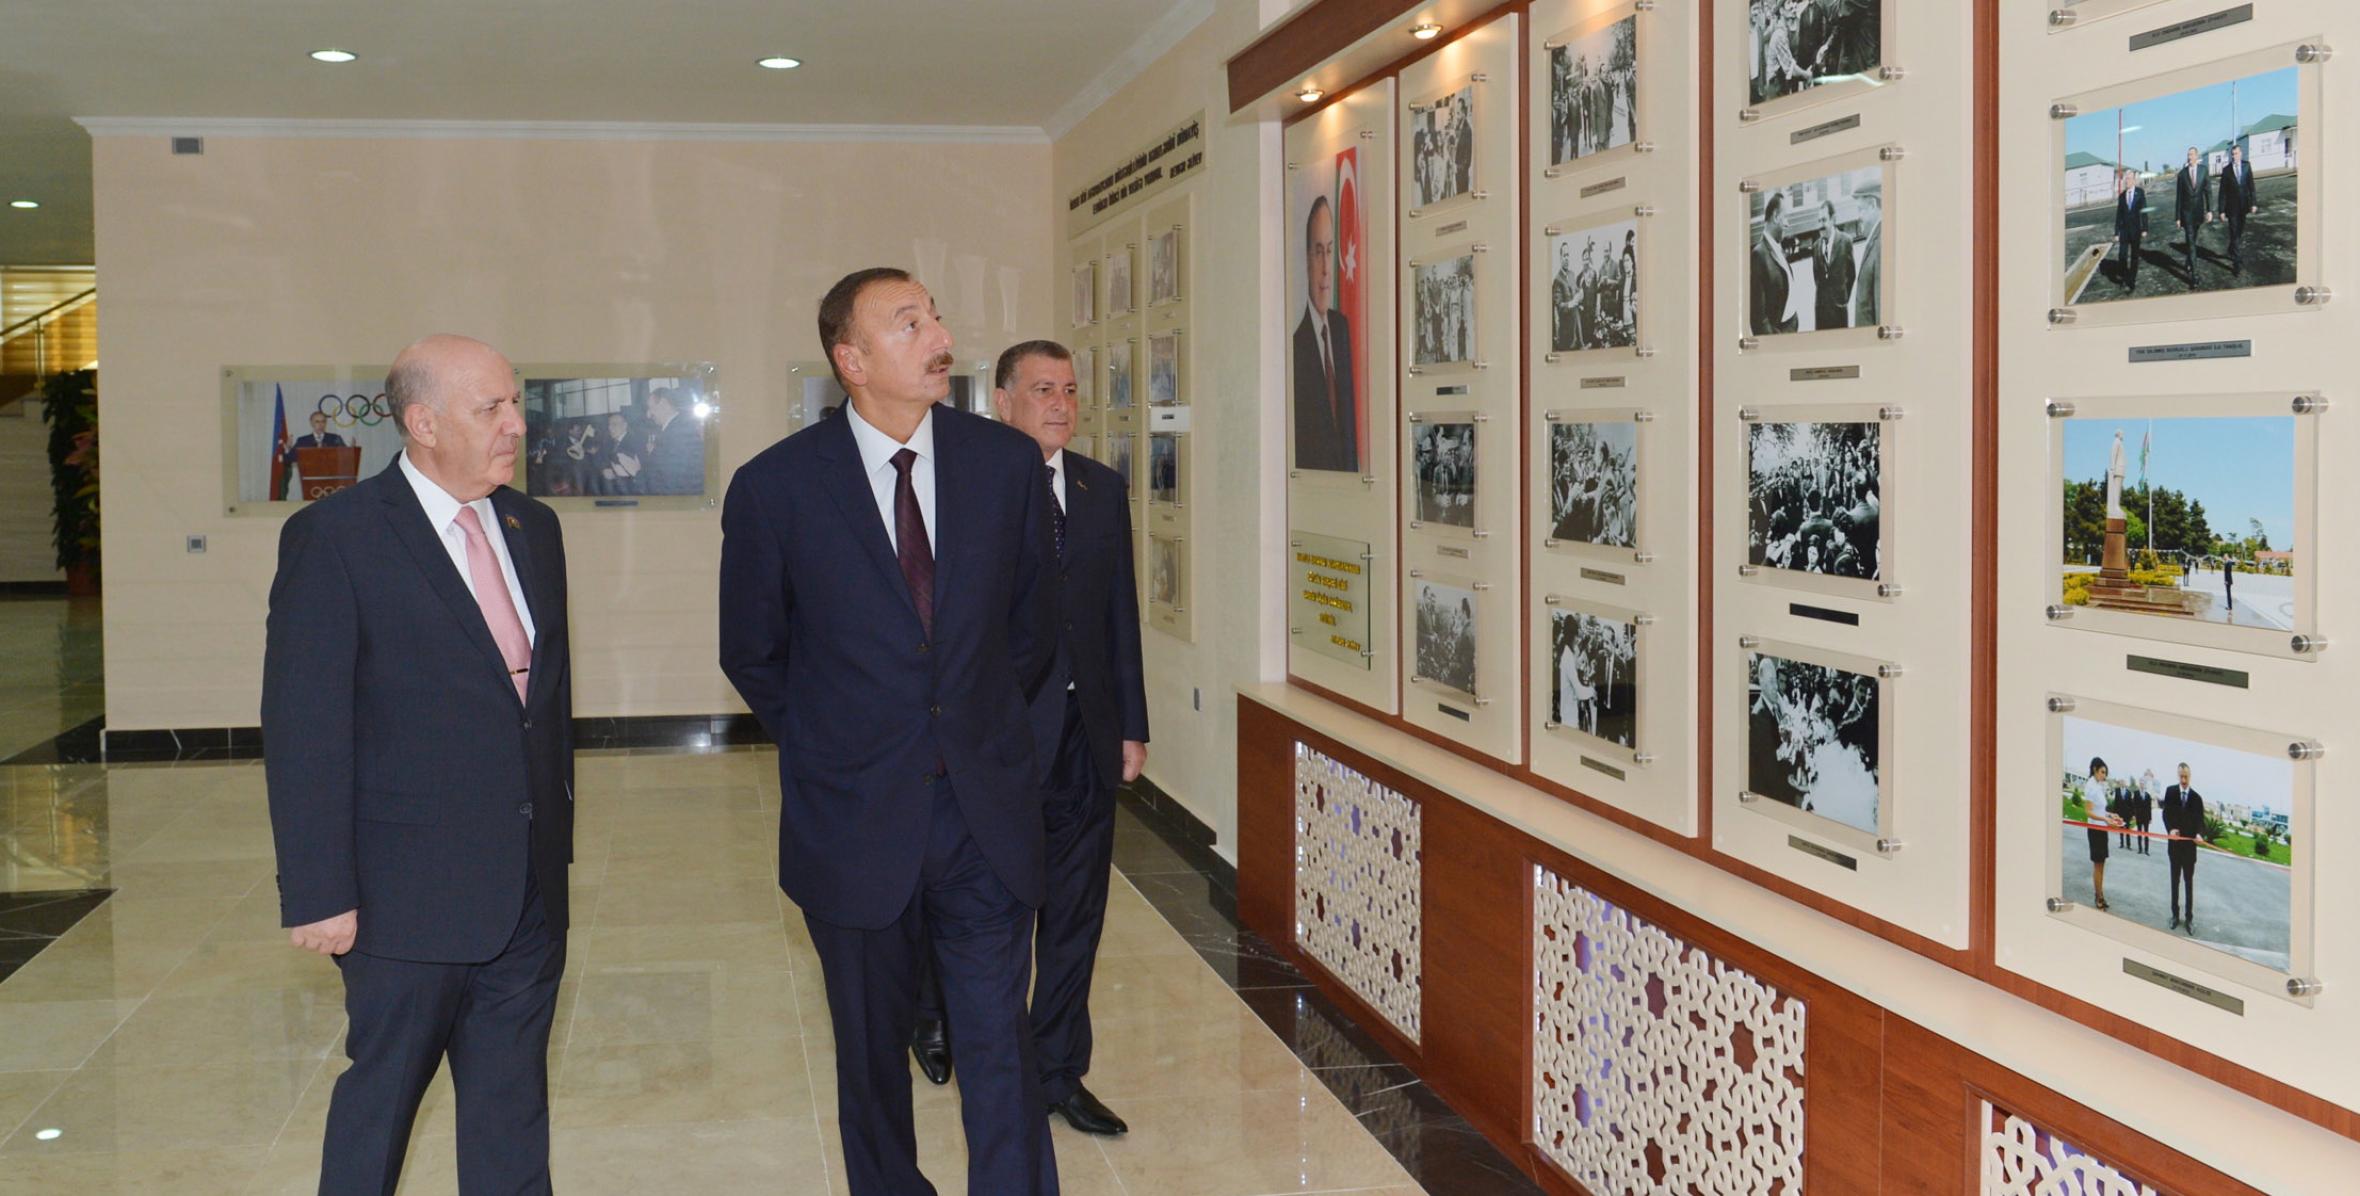 Ilham Aliyev attended the opening of the Saatli Olympic Sports Center